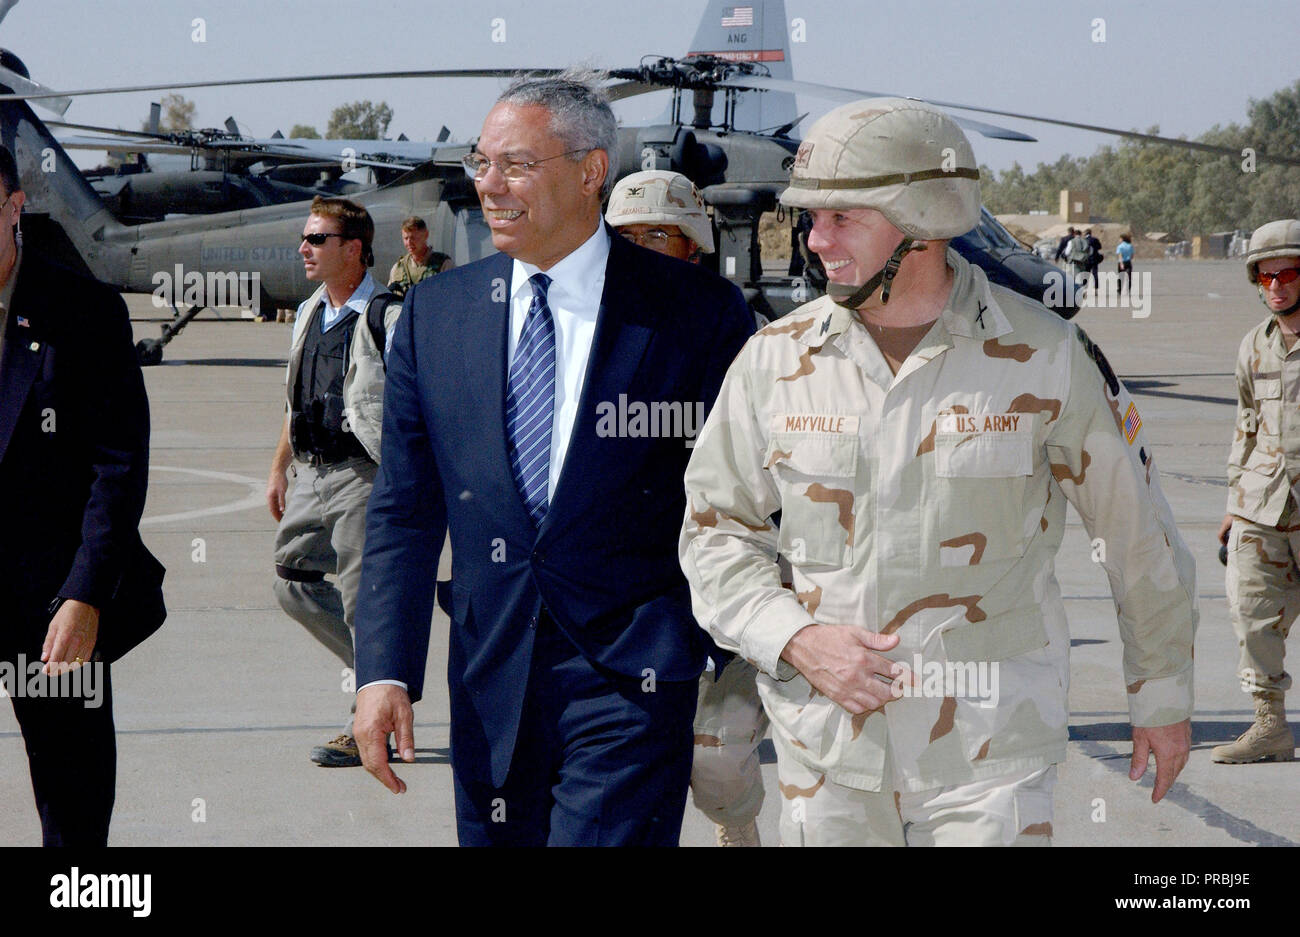 US Army Colonel William Mayville, Commander, 173rd Airborne Brigade (ABN BDE) welcomes US Secretary of State Colin L. Powell upon his arrival at Kirkuk Air Base (AB), Iraq. The Secretary is visiting numerous locations throughout Iraq including Baghdad, and Kirkuk to meet with the troops supporting Operation IRAQI FREEDOM. Stock Photo